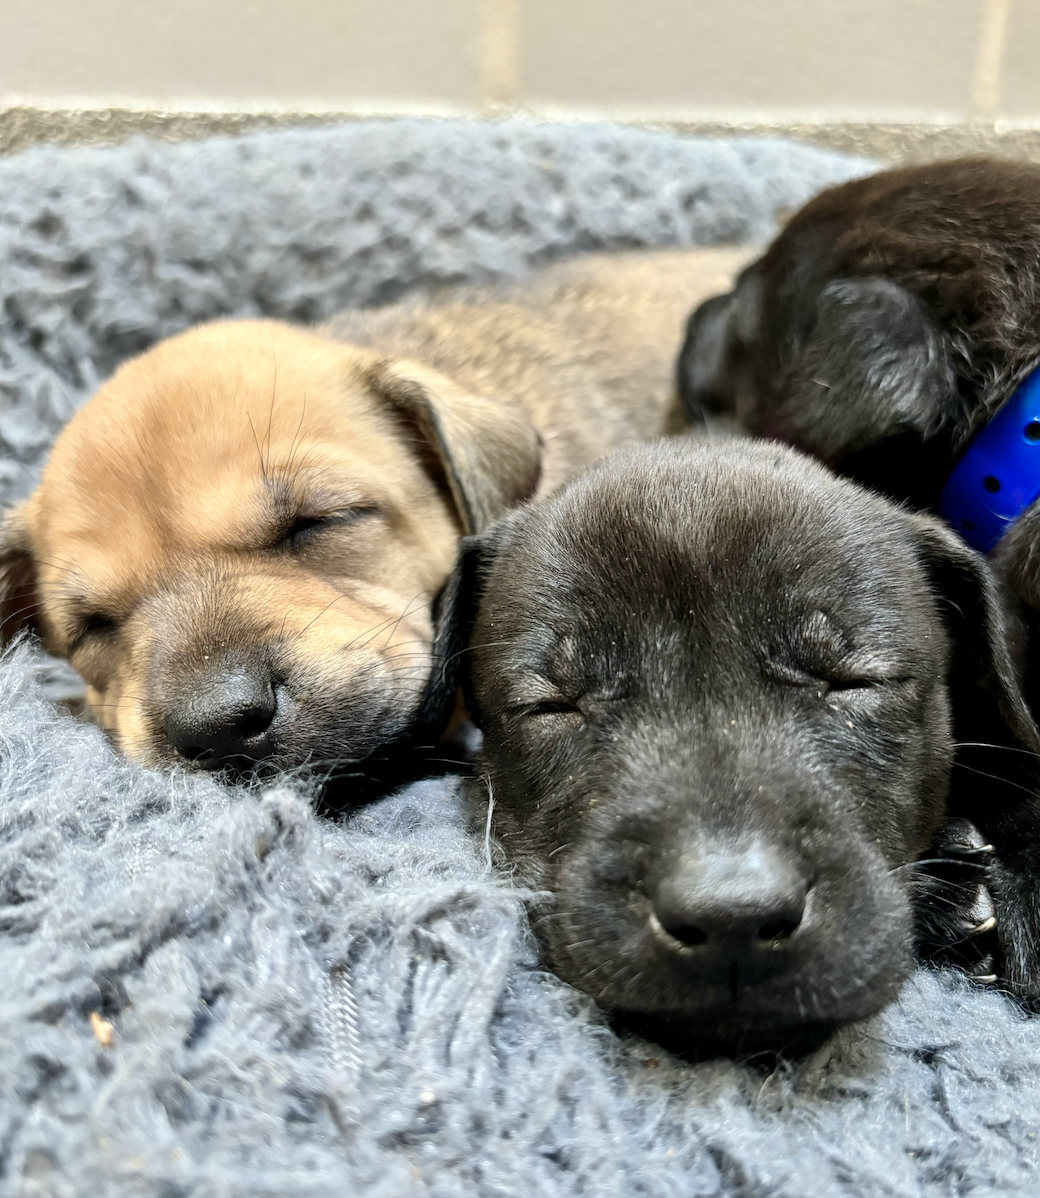 Playoff pups: The Animal Foundation has litter of Golden Knights puppies